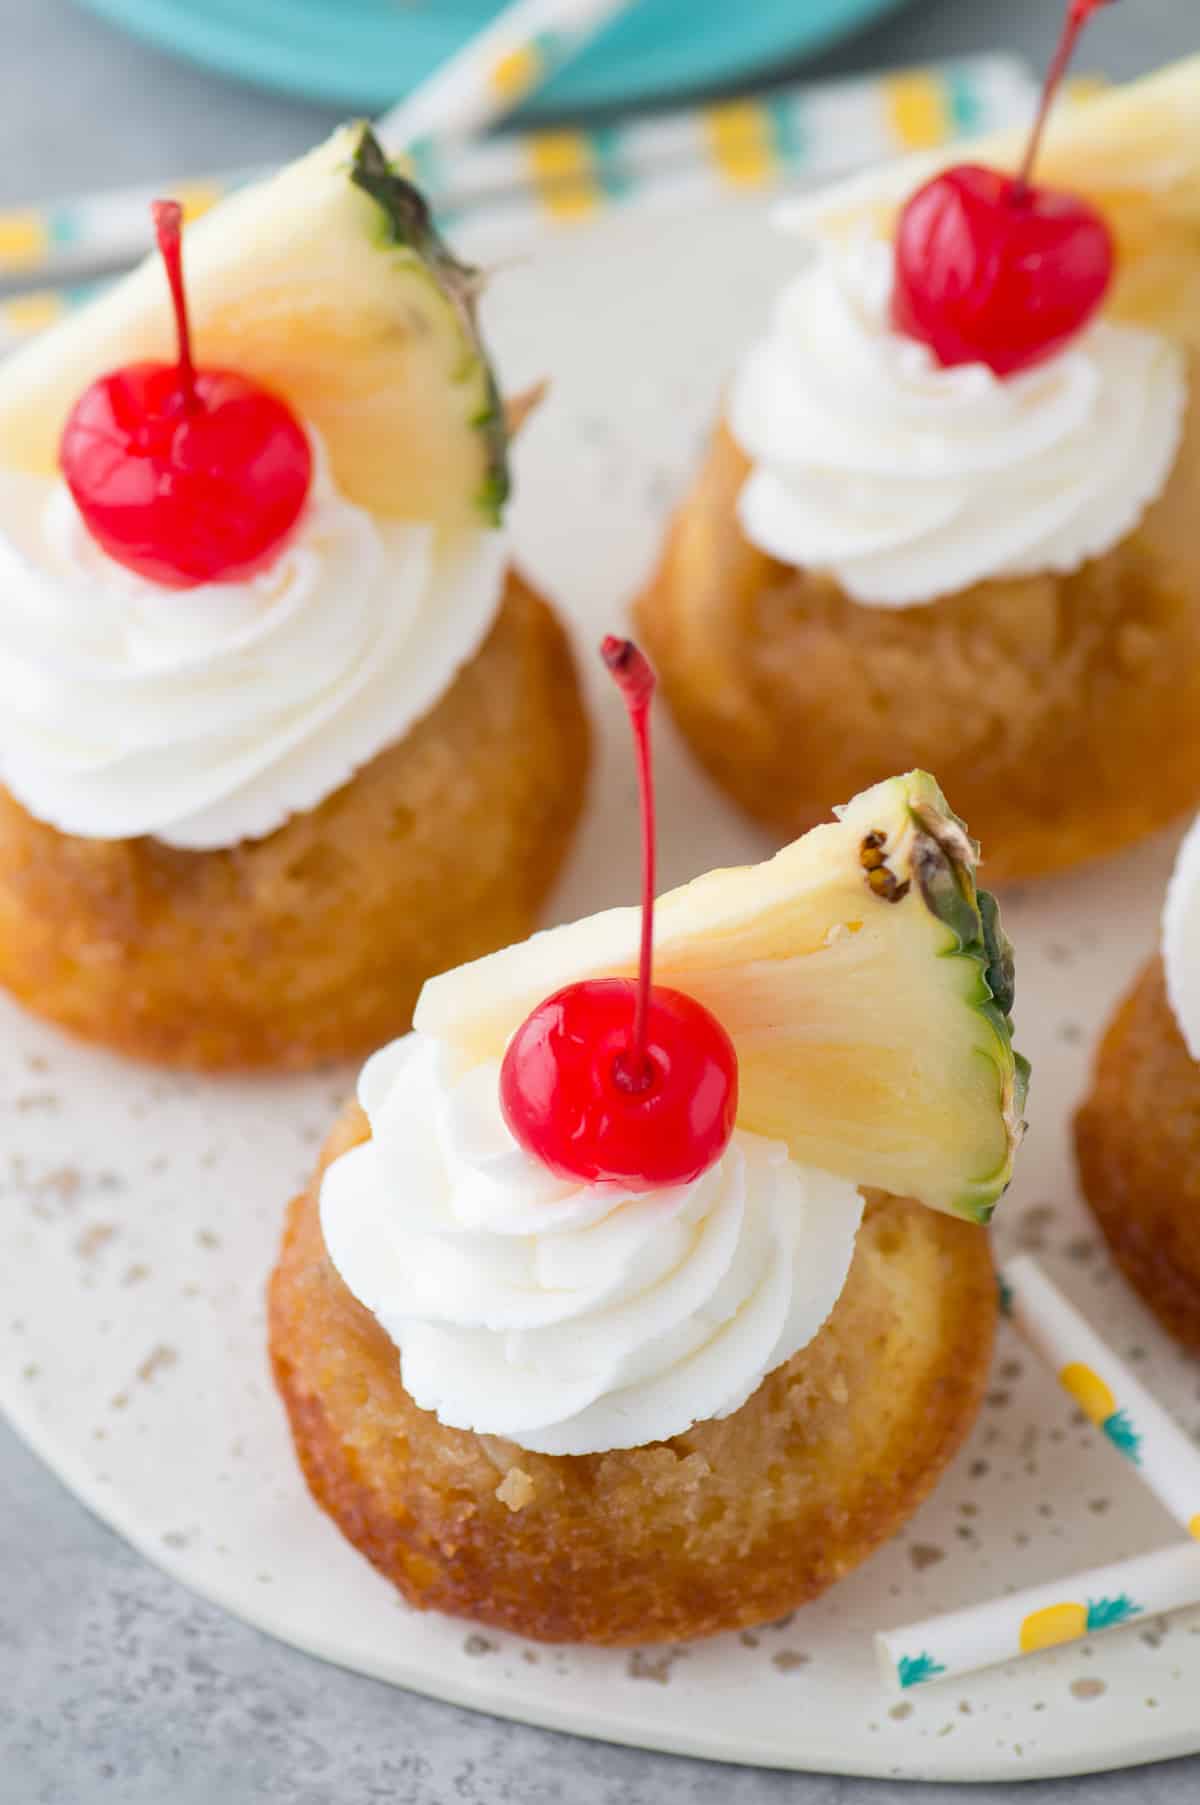 mini pineapple upside down cakes with whipped cream, a cherry and pineapple slice on white plate